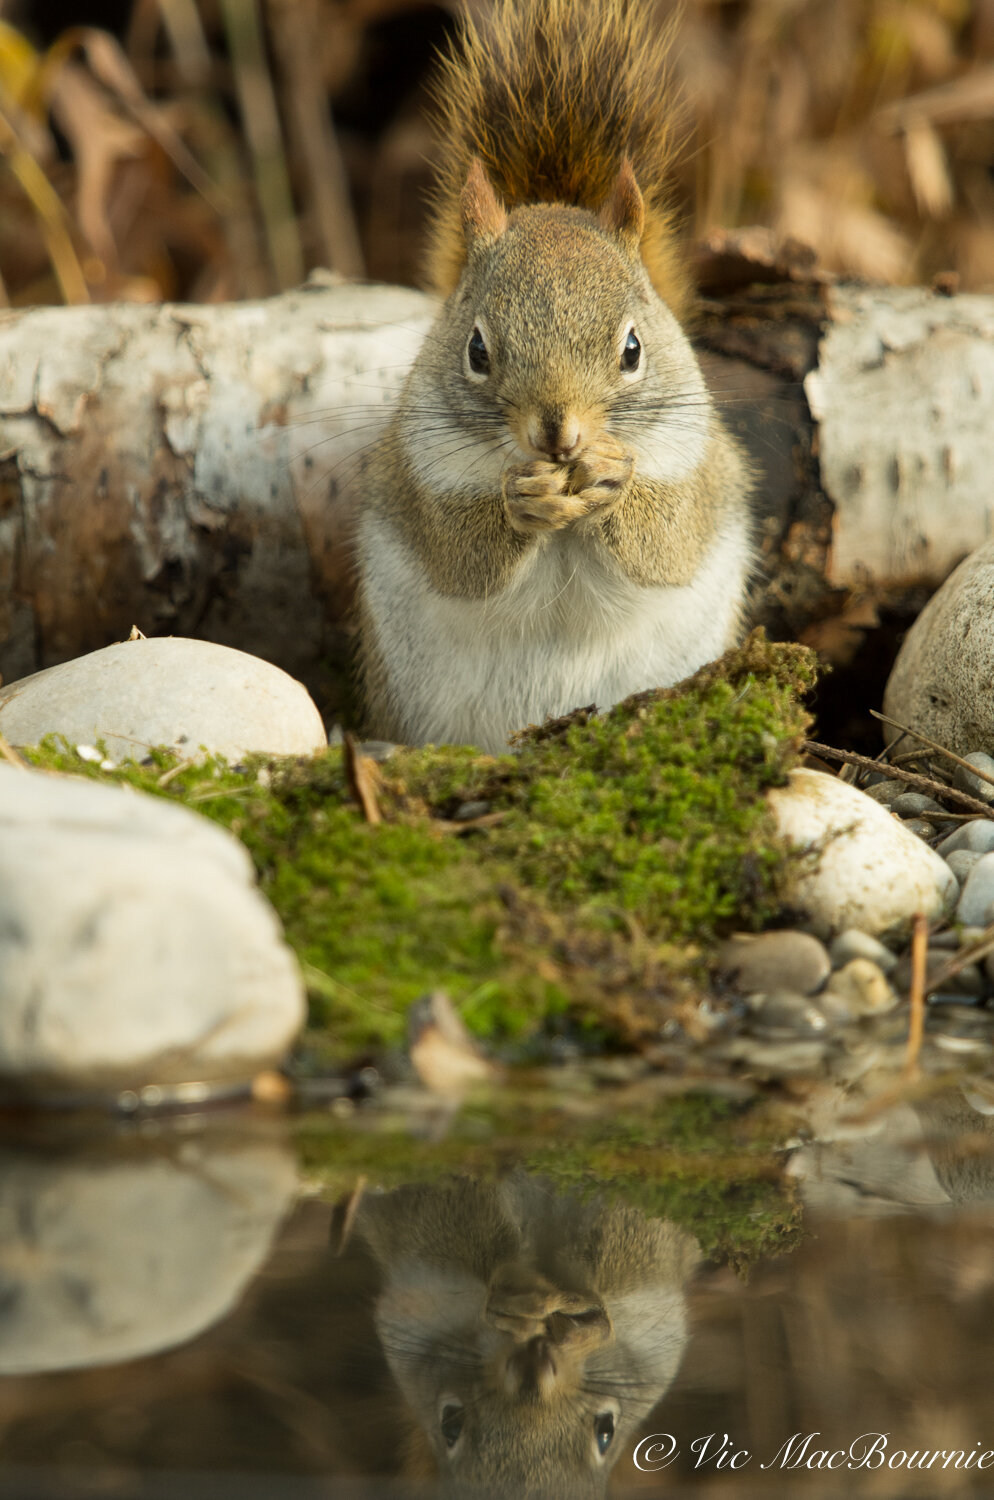 Providing water is critical for wildlife to survive. A small pond allows access for small mammals, birds and amphibians.